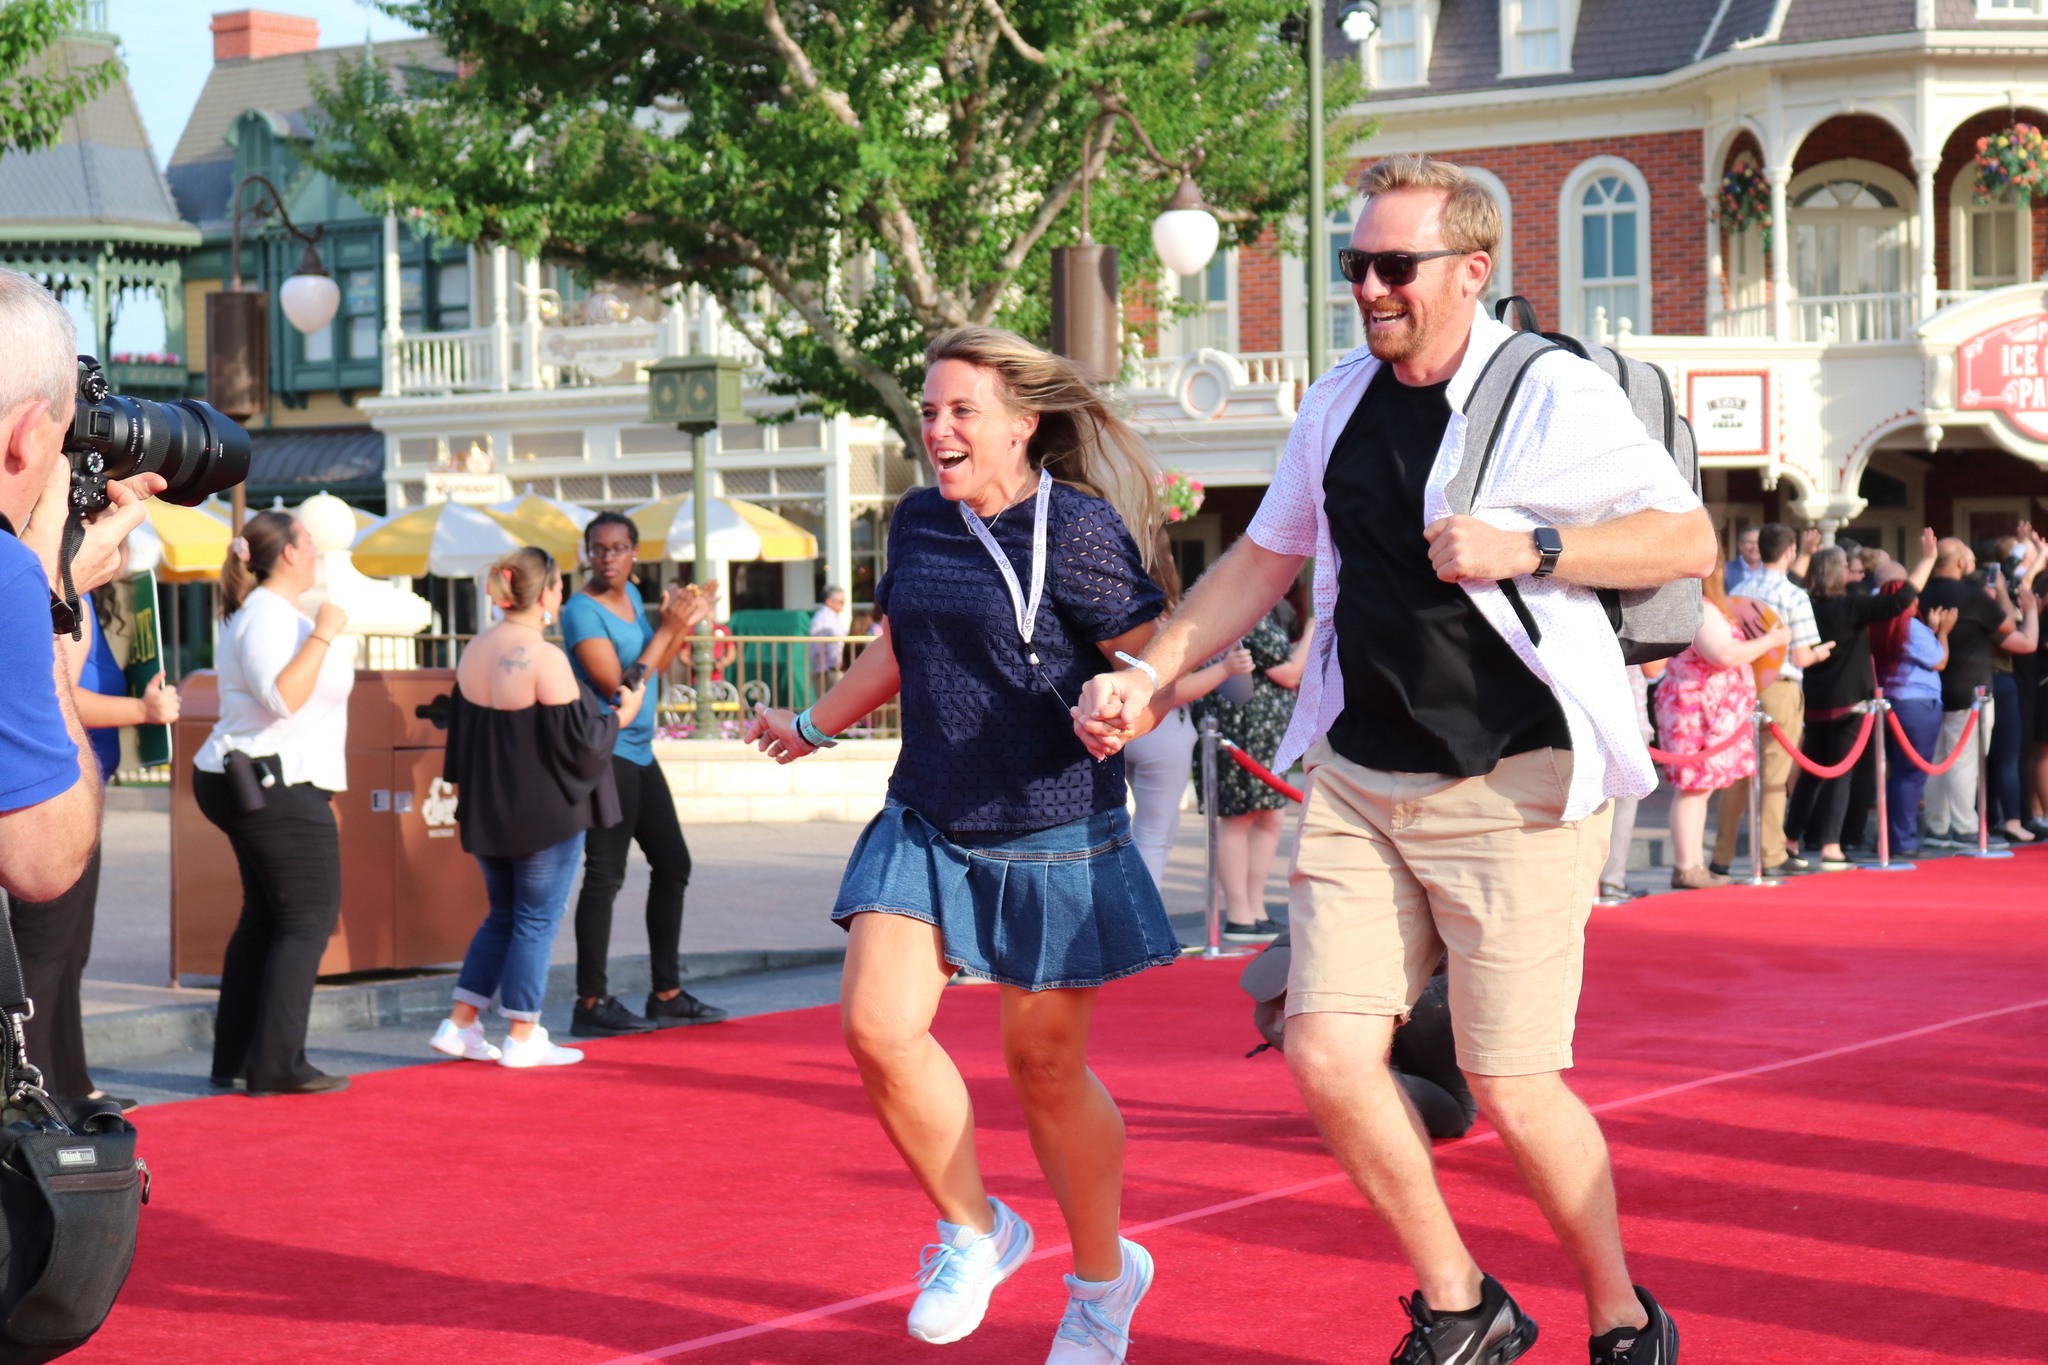 See What Happened at the Walt Disney World Service Celebration